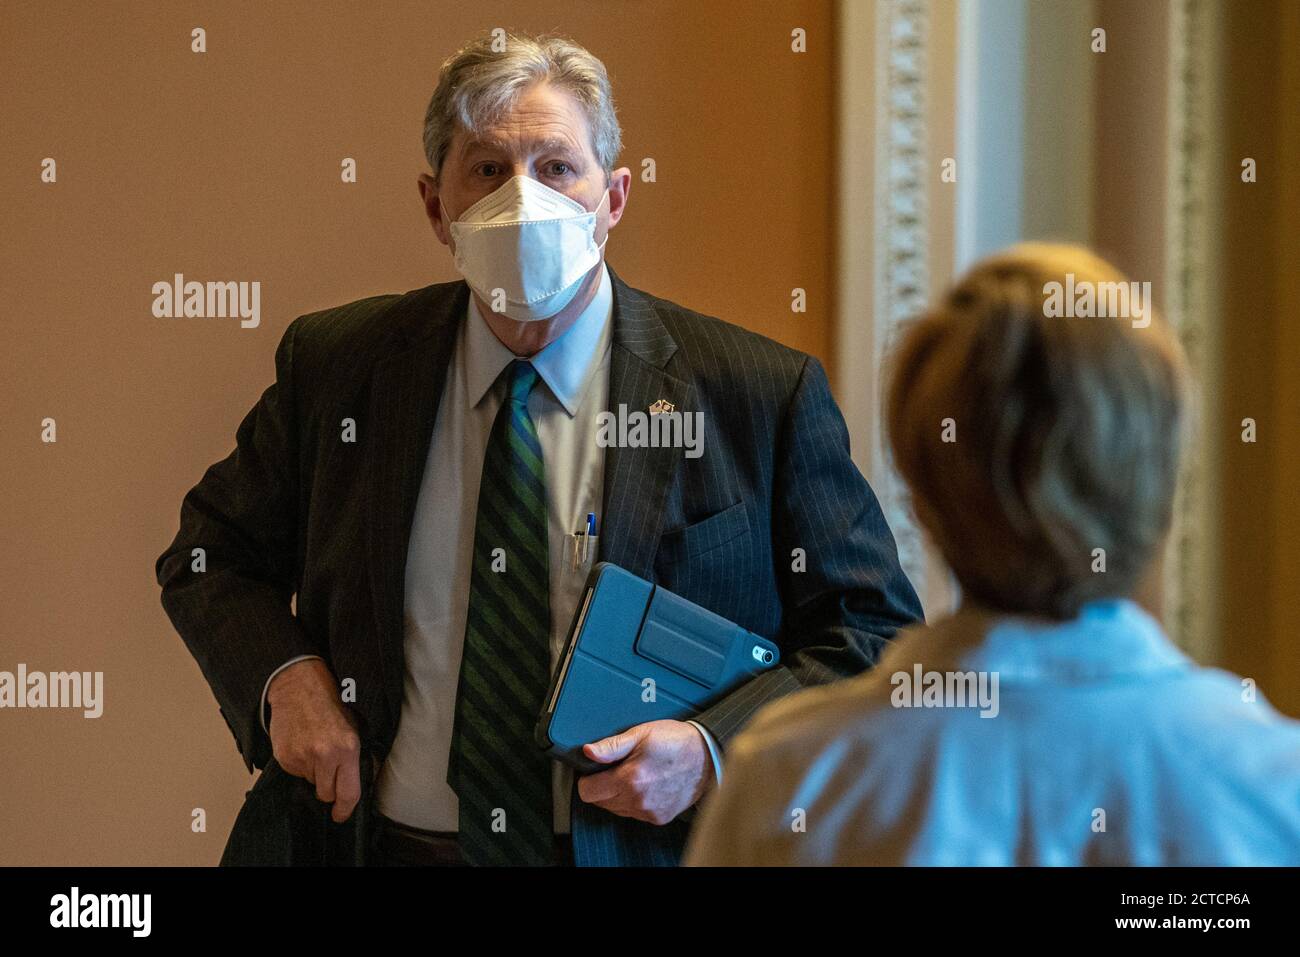 Washington, United States. 22nd Sep, 2020. U.S. Sen. John Kennedy (R-LA) leaves the Mansfield Room after meetings to the Senate Chambers for a vote on Capitol Hill in Washington, DC Tuesday, September 22, 2020. Photo by Ken Cedeno/UPI Credit: UPI/Alamy Live News Stock Photo